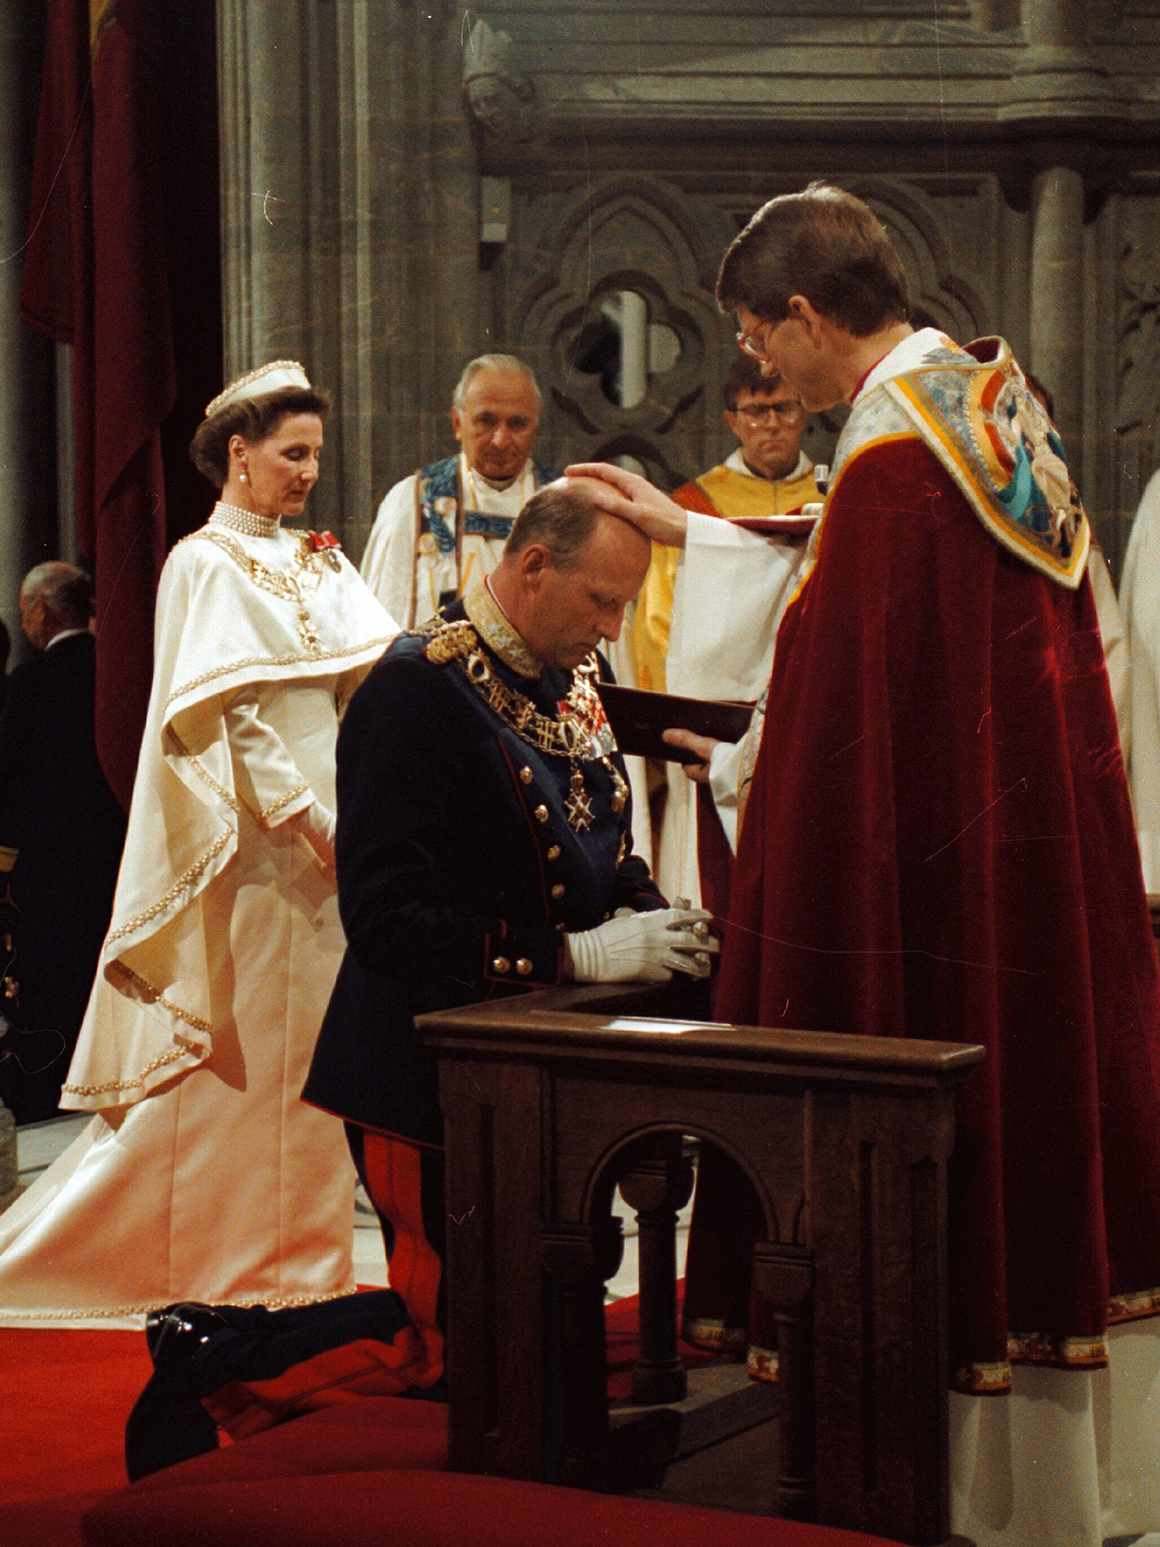 The Consecration of King Harald and Queen Sonja - The Royal House of Norway